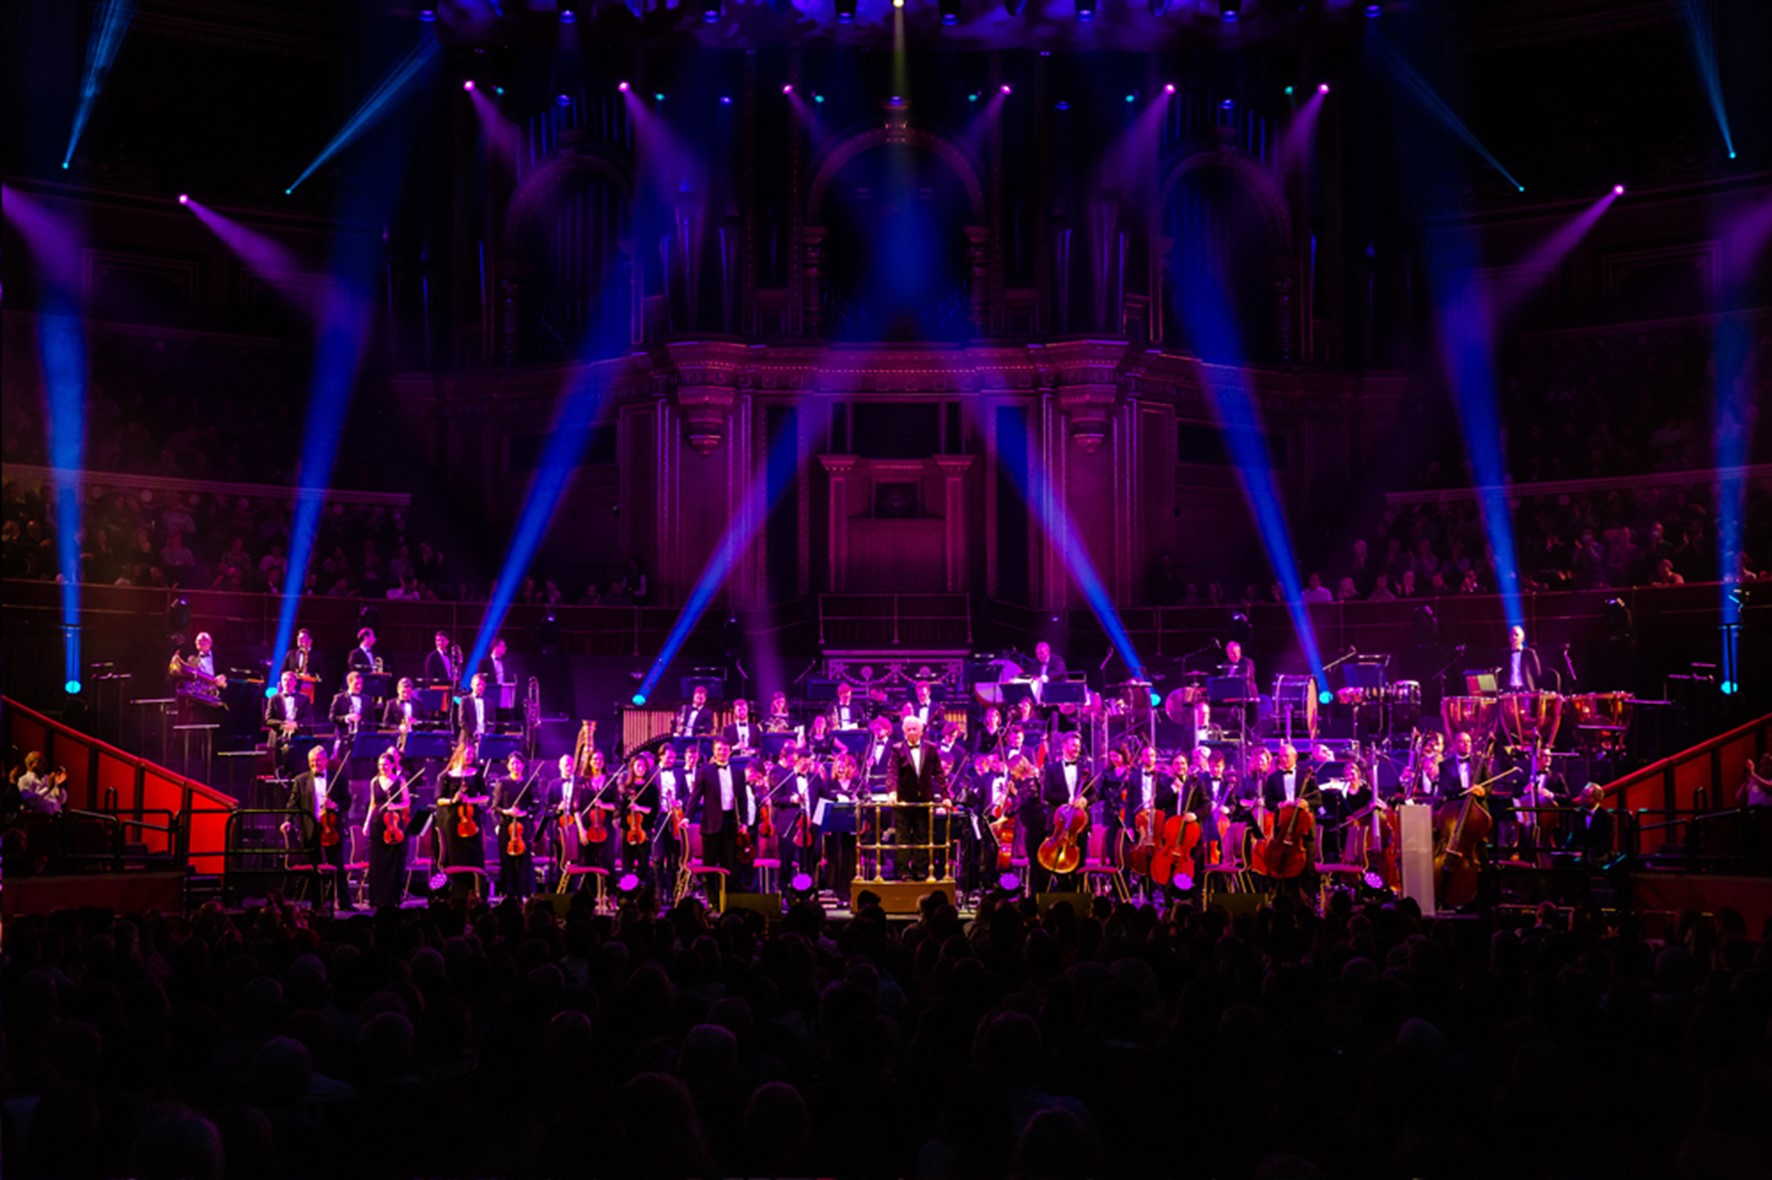 The photo of Royal Philharmonic Orchestra performing